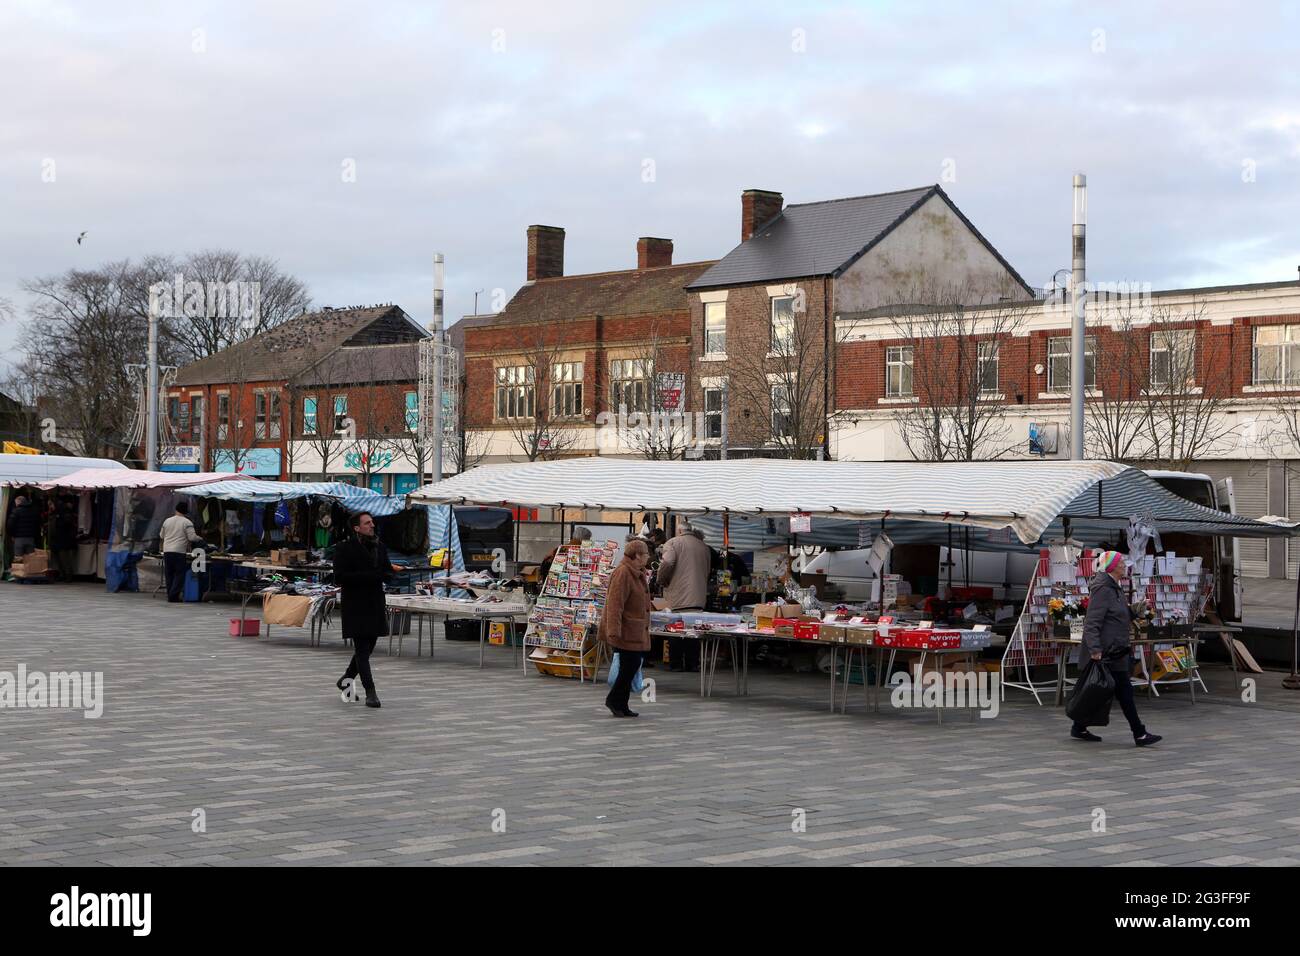 The Market Square in Blyth, Northumberland, a constituency which swung from Labour to Conservative in last nights General Election. Stock Photo